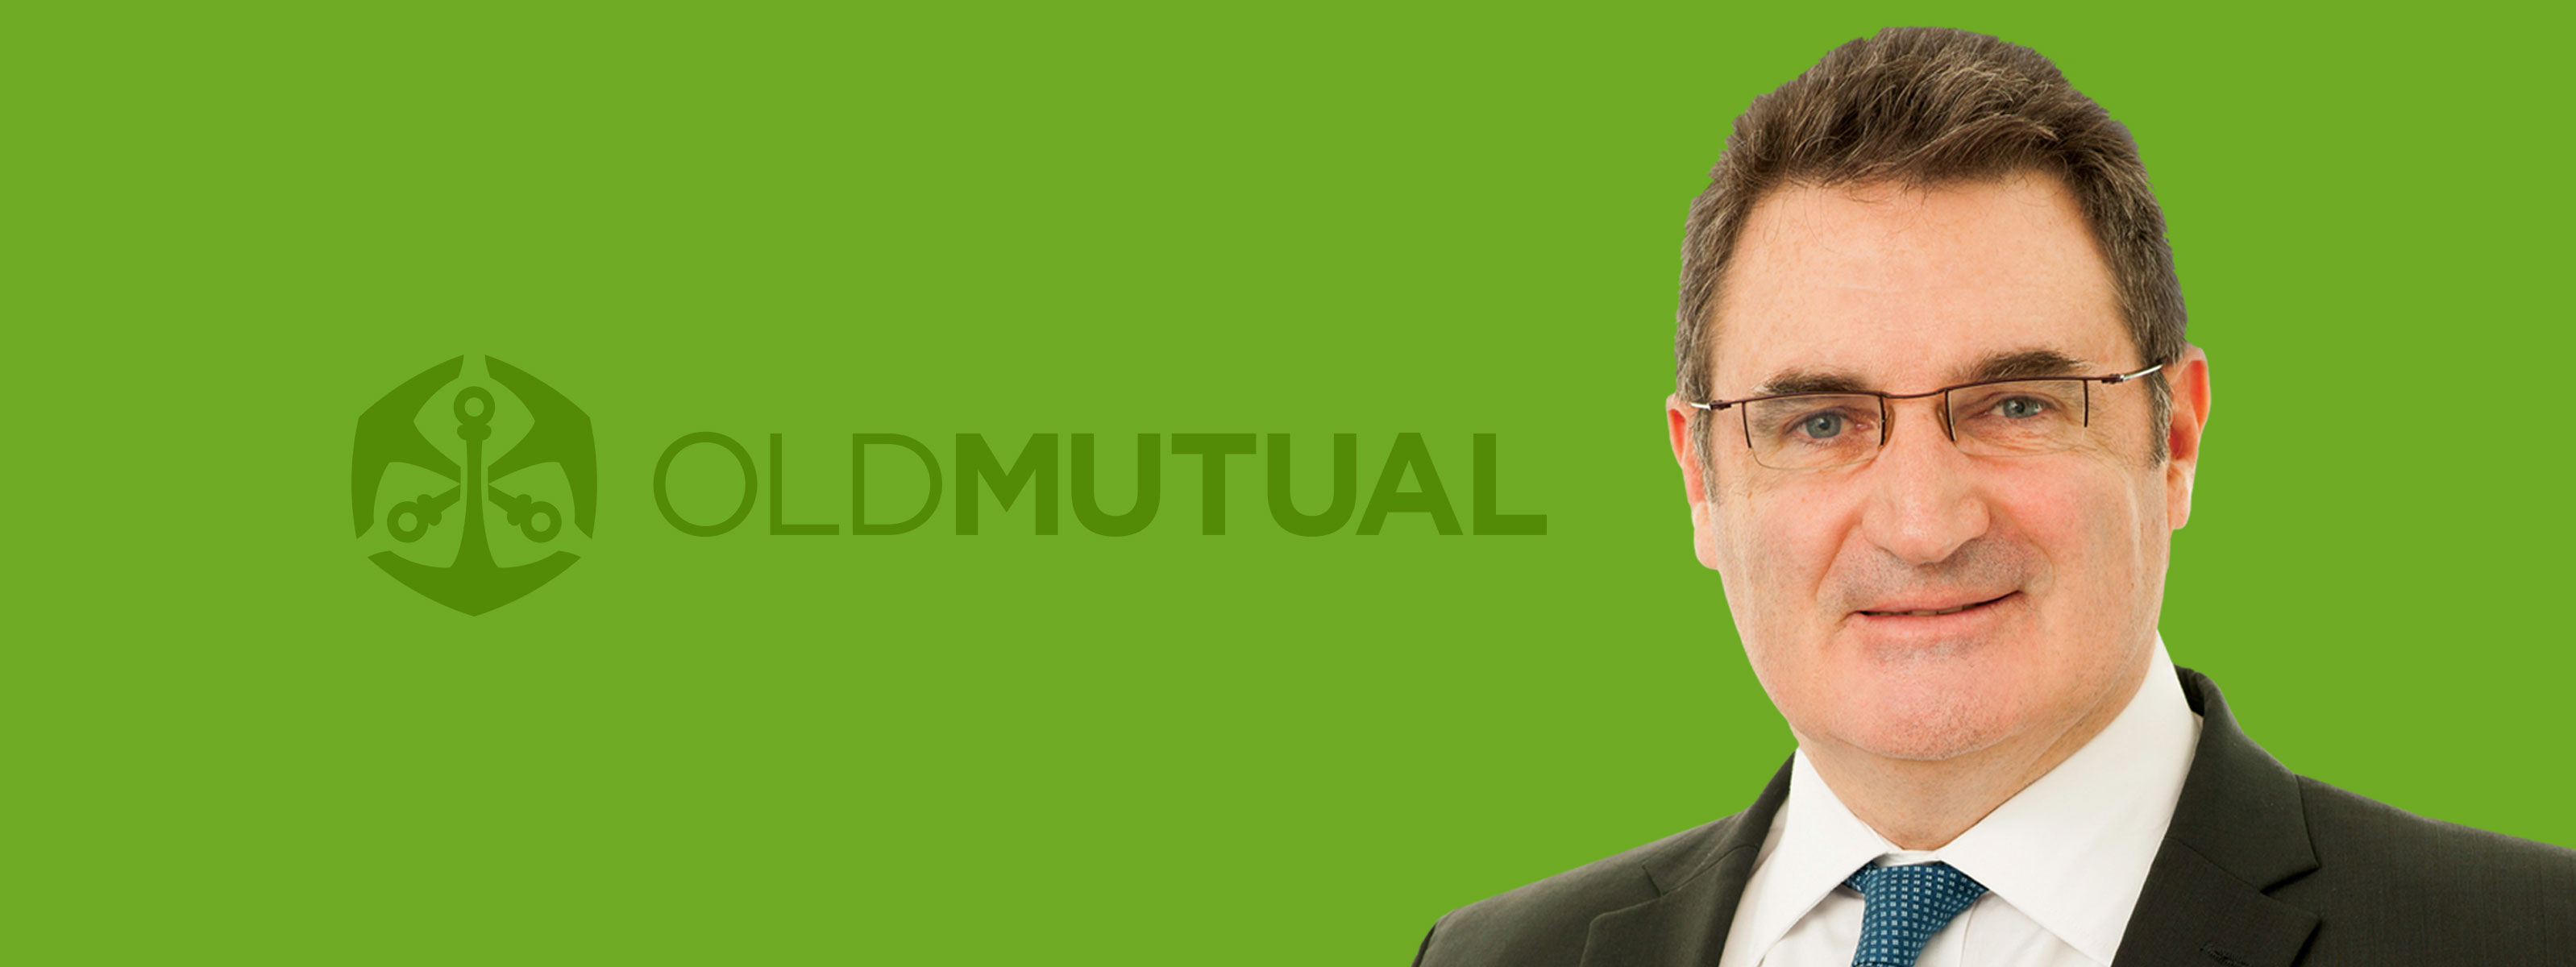 Old Mutual Group Banner